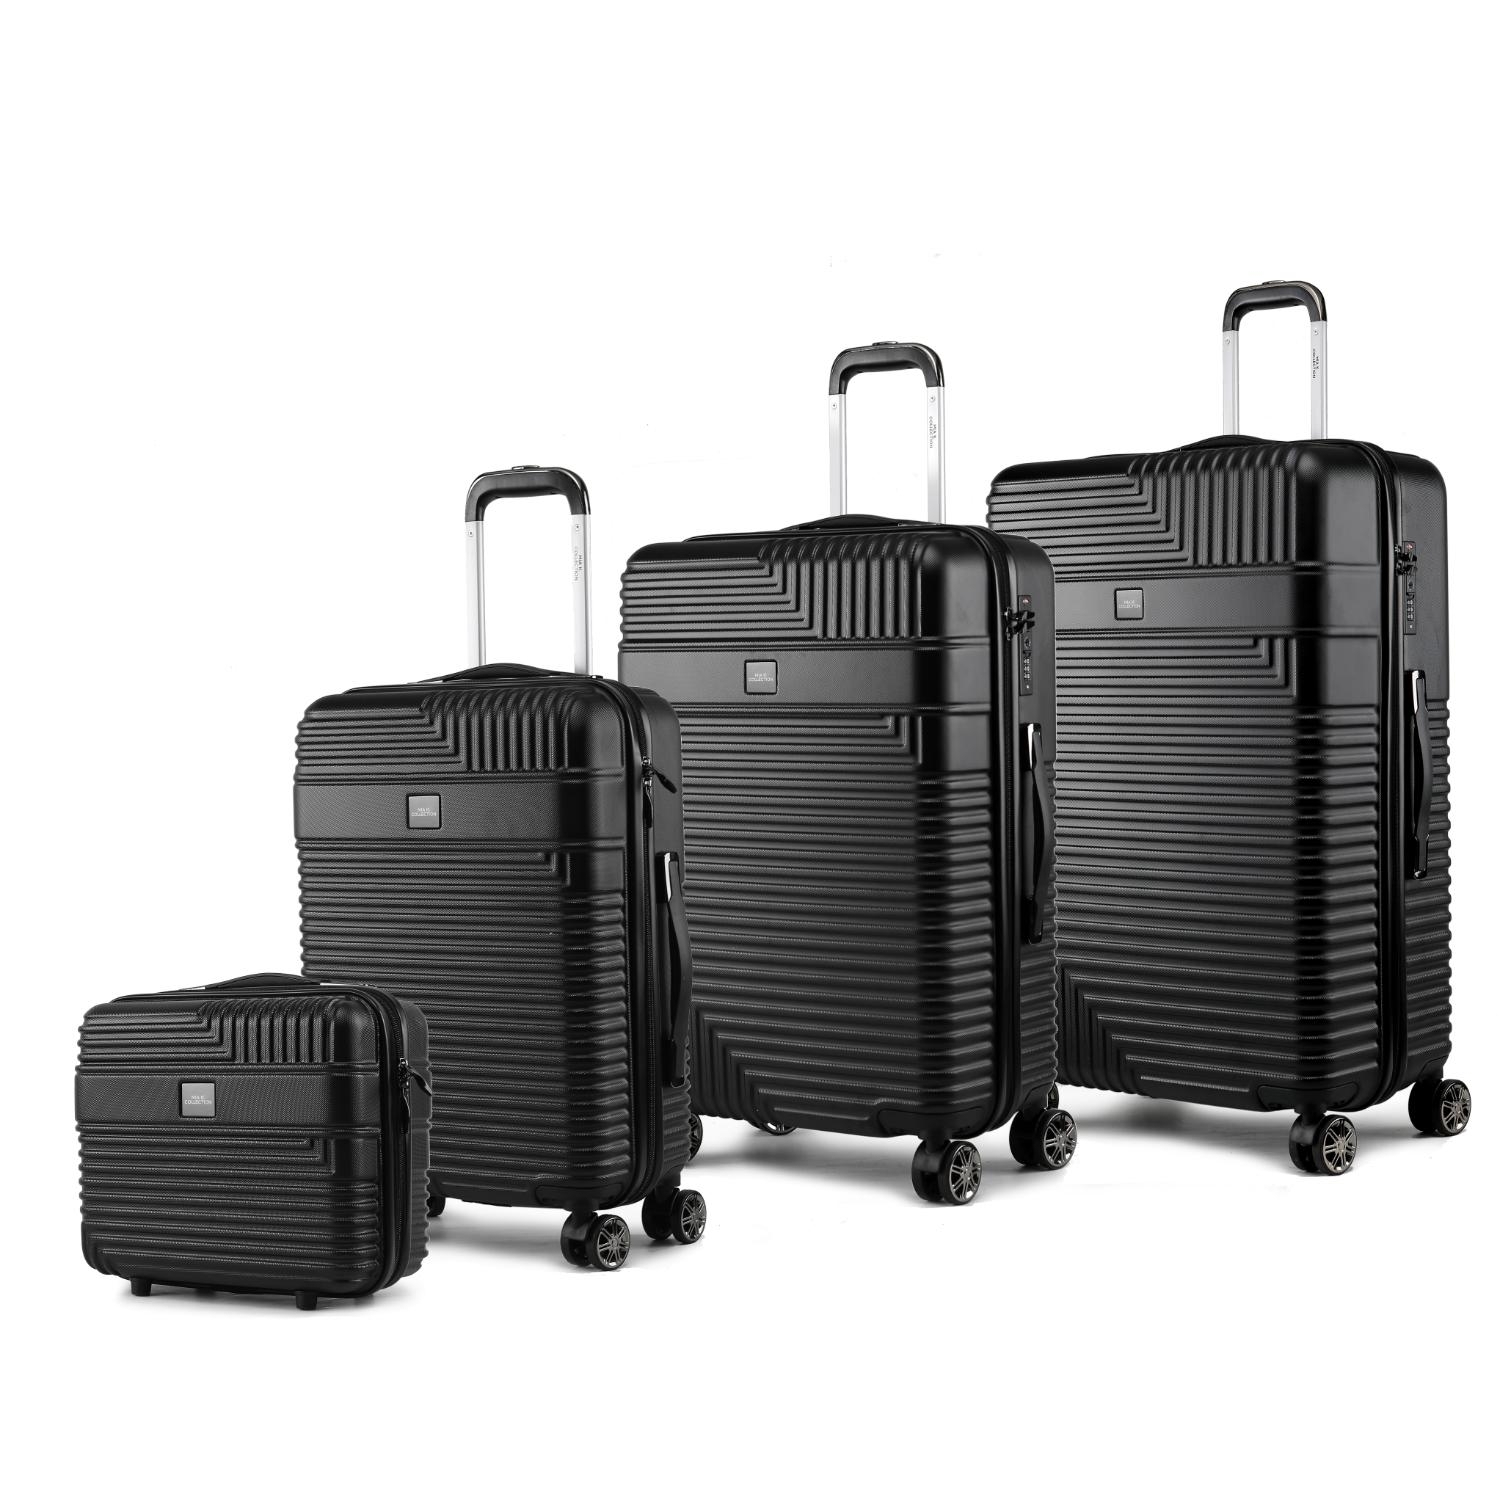 MKF Collection Mykonos Luggage Set- Extra Large Check-in, Large Check-in, Medium Carry-on, And Small Cosmetic Case 4 Pieces By Mia K - Rose